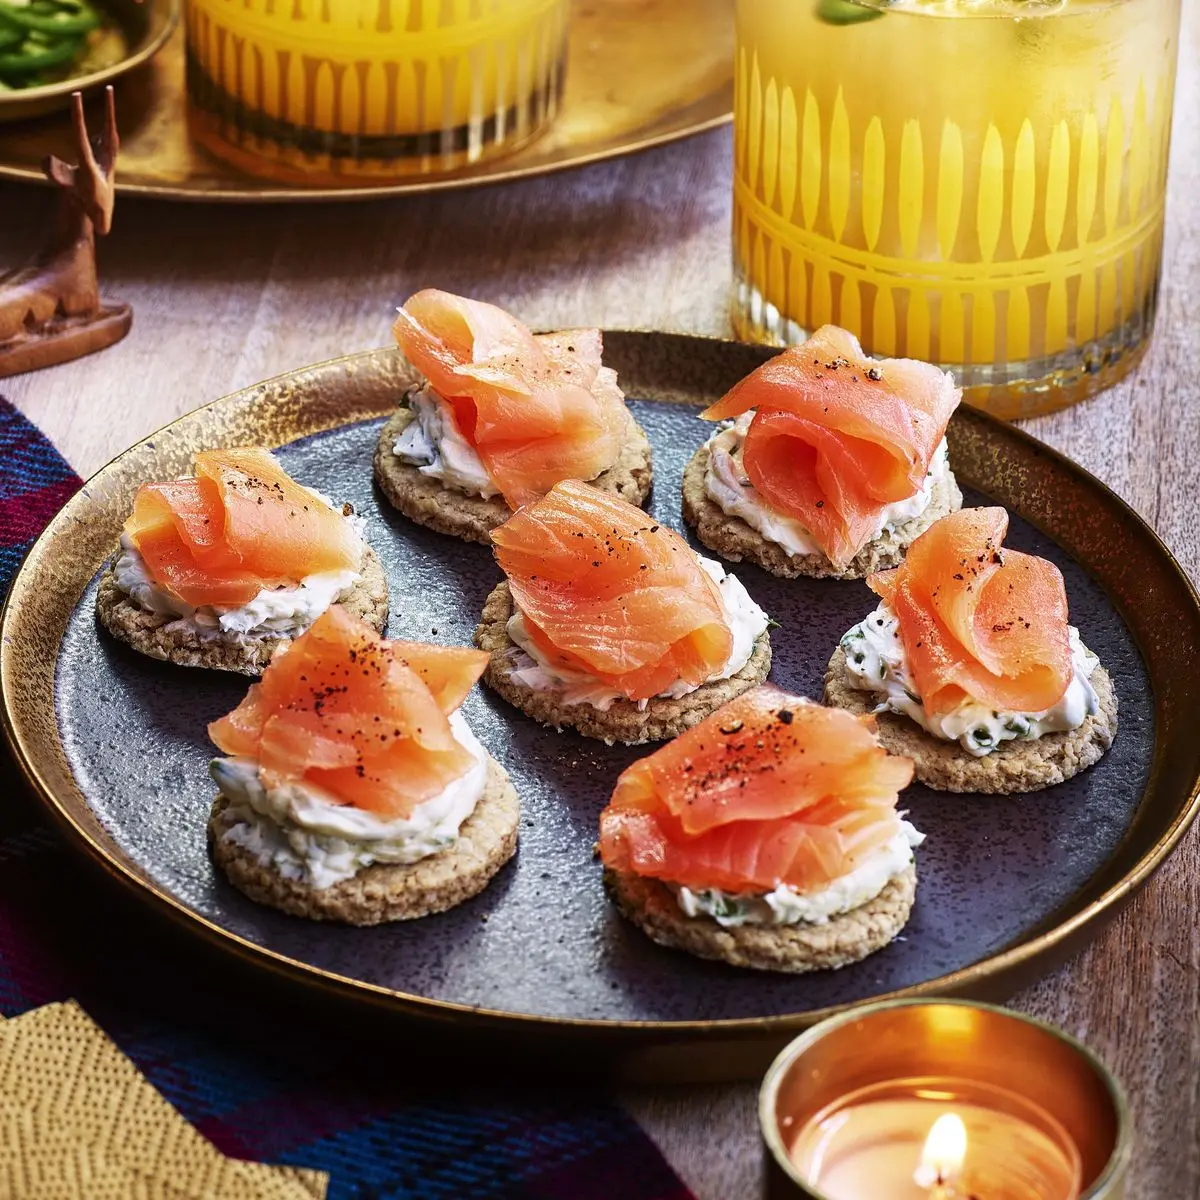 oatcakes and smoked salmon - Are oatcakes good for breakfast